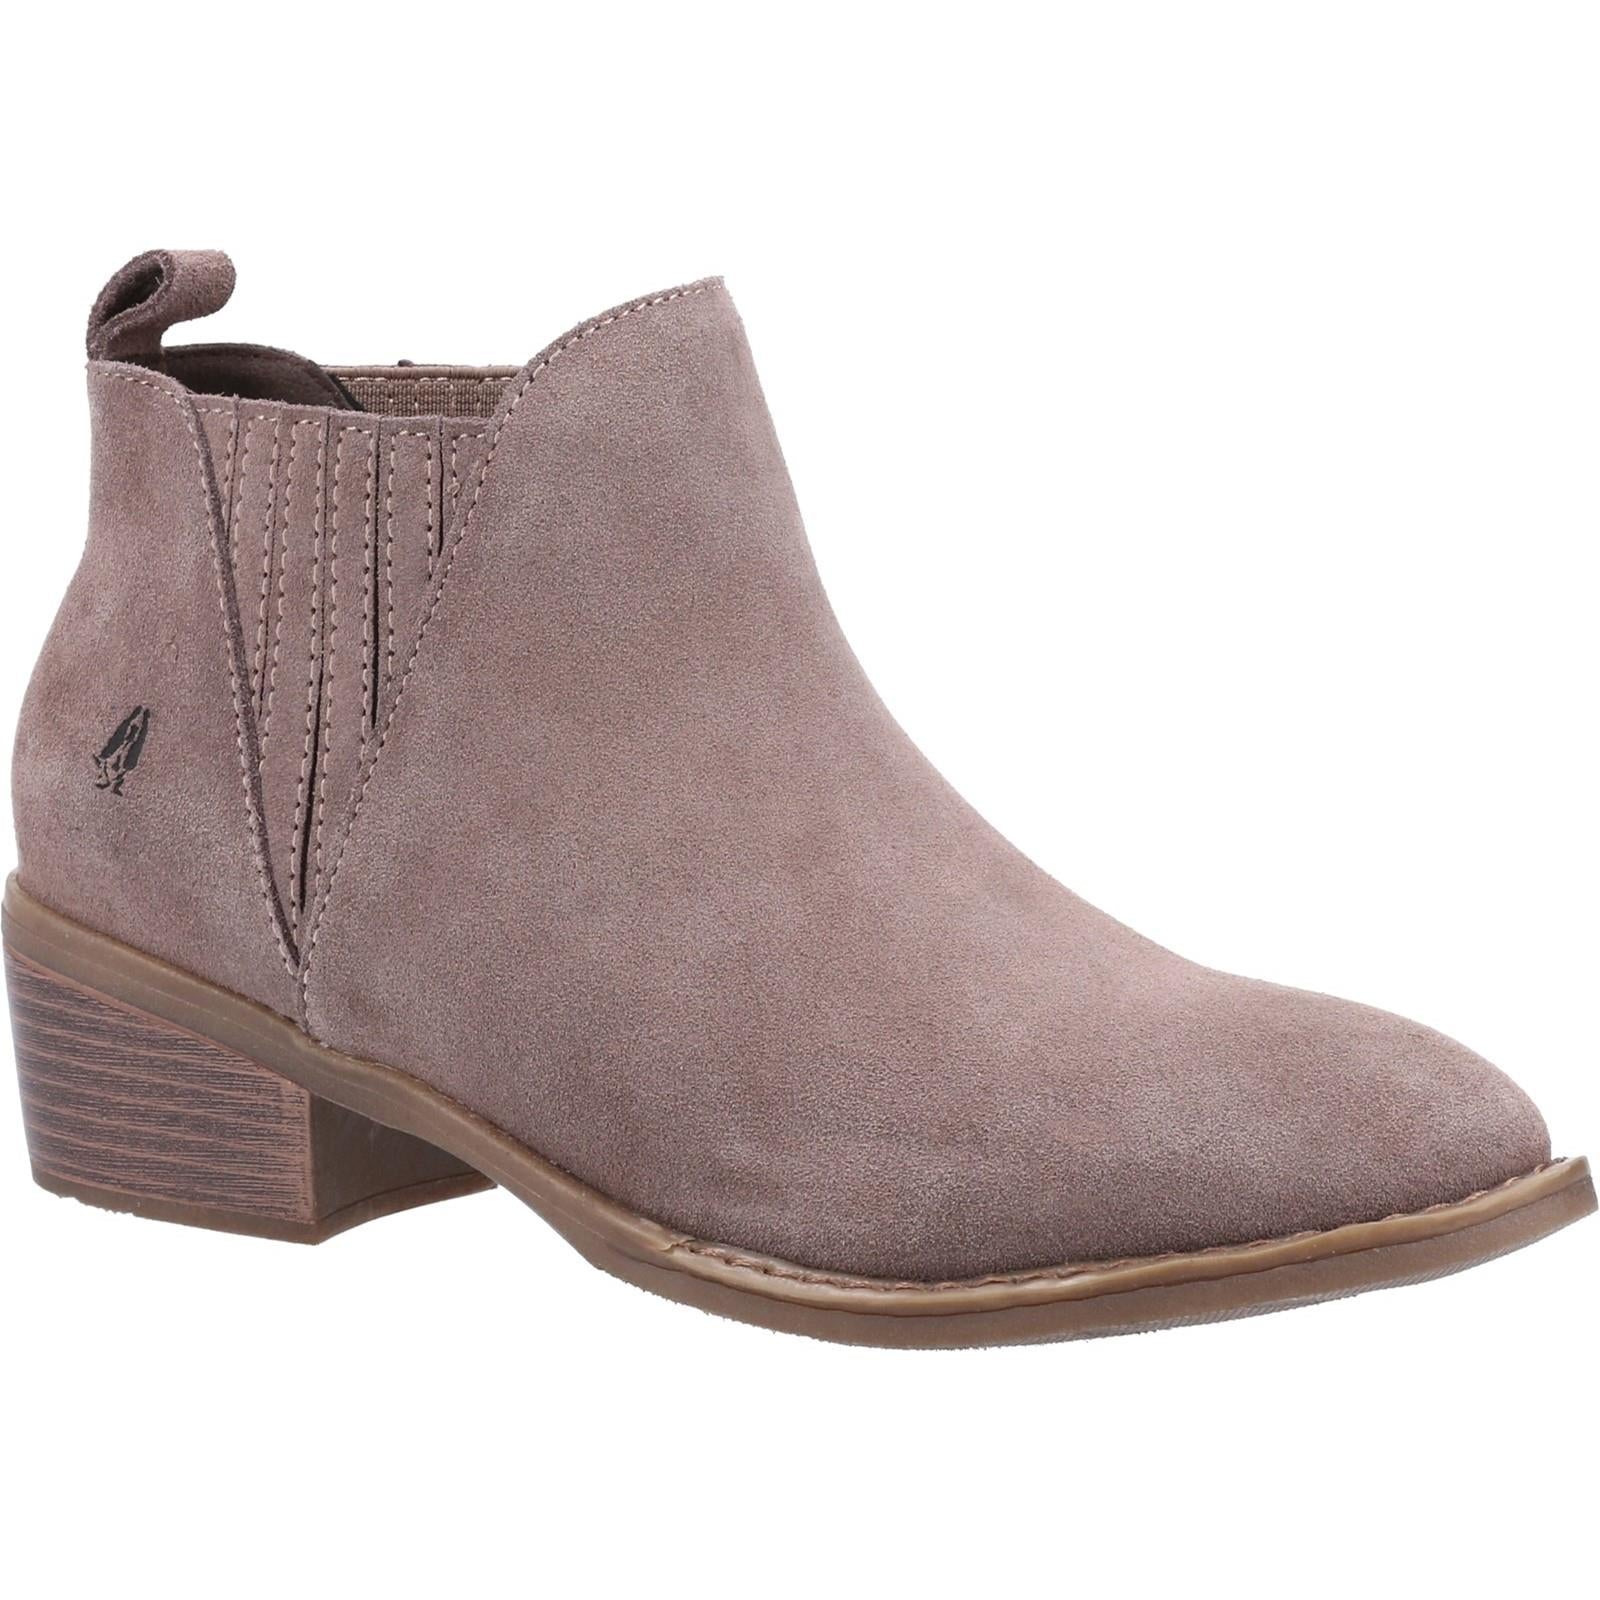 Hush Puppies Isobel taupe ladies memory foam fleece lined Chelsea ankle boots